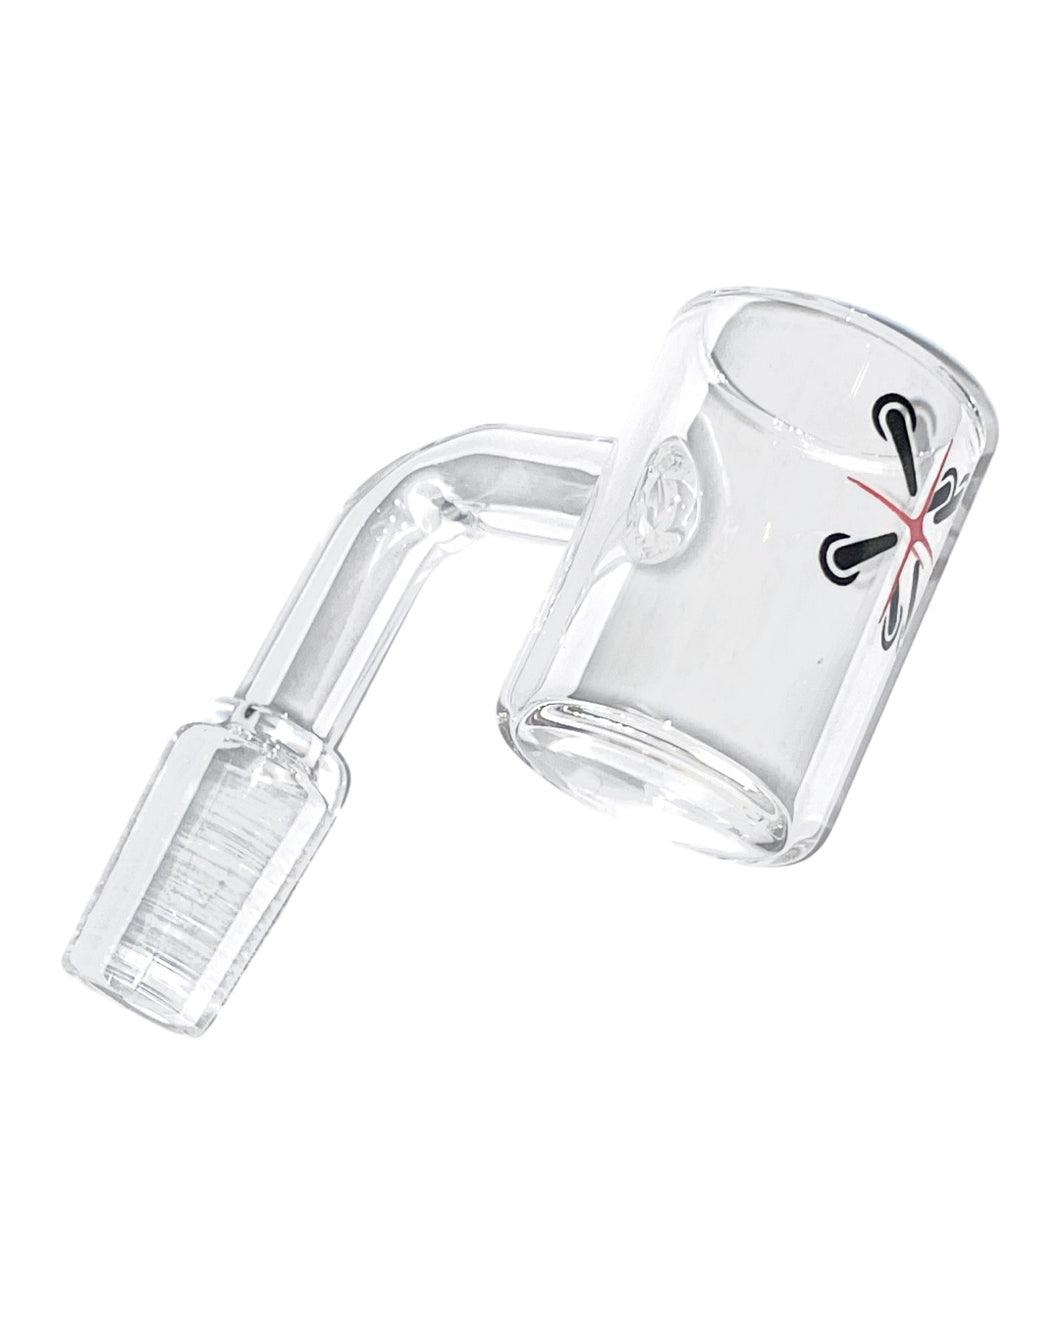 A replacement glass banger for the Flux Ion Plasma Rig.